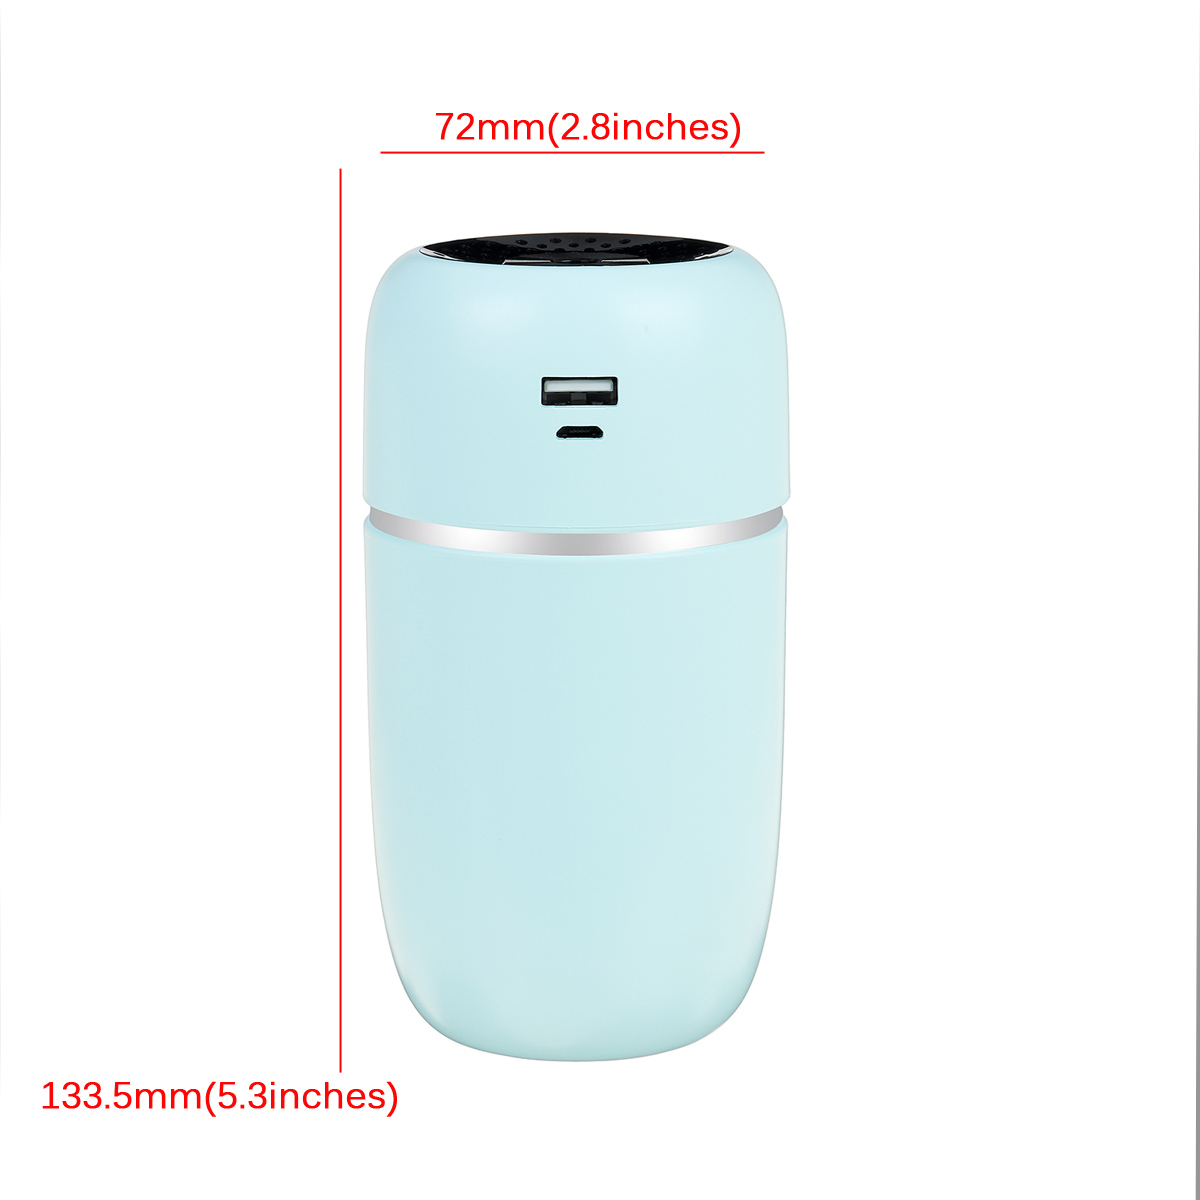 200ml-Electric-Air-Humidifier-Diffuser-Aroma-Mist-Purifier-LED-Light-USB-Charging-Power-Bank-for-Por-1809965-10